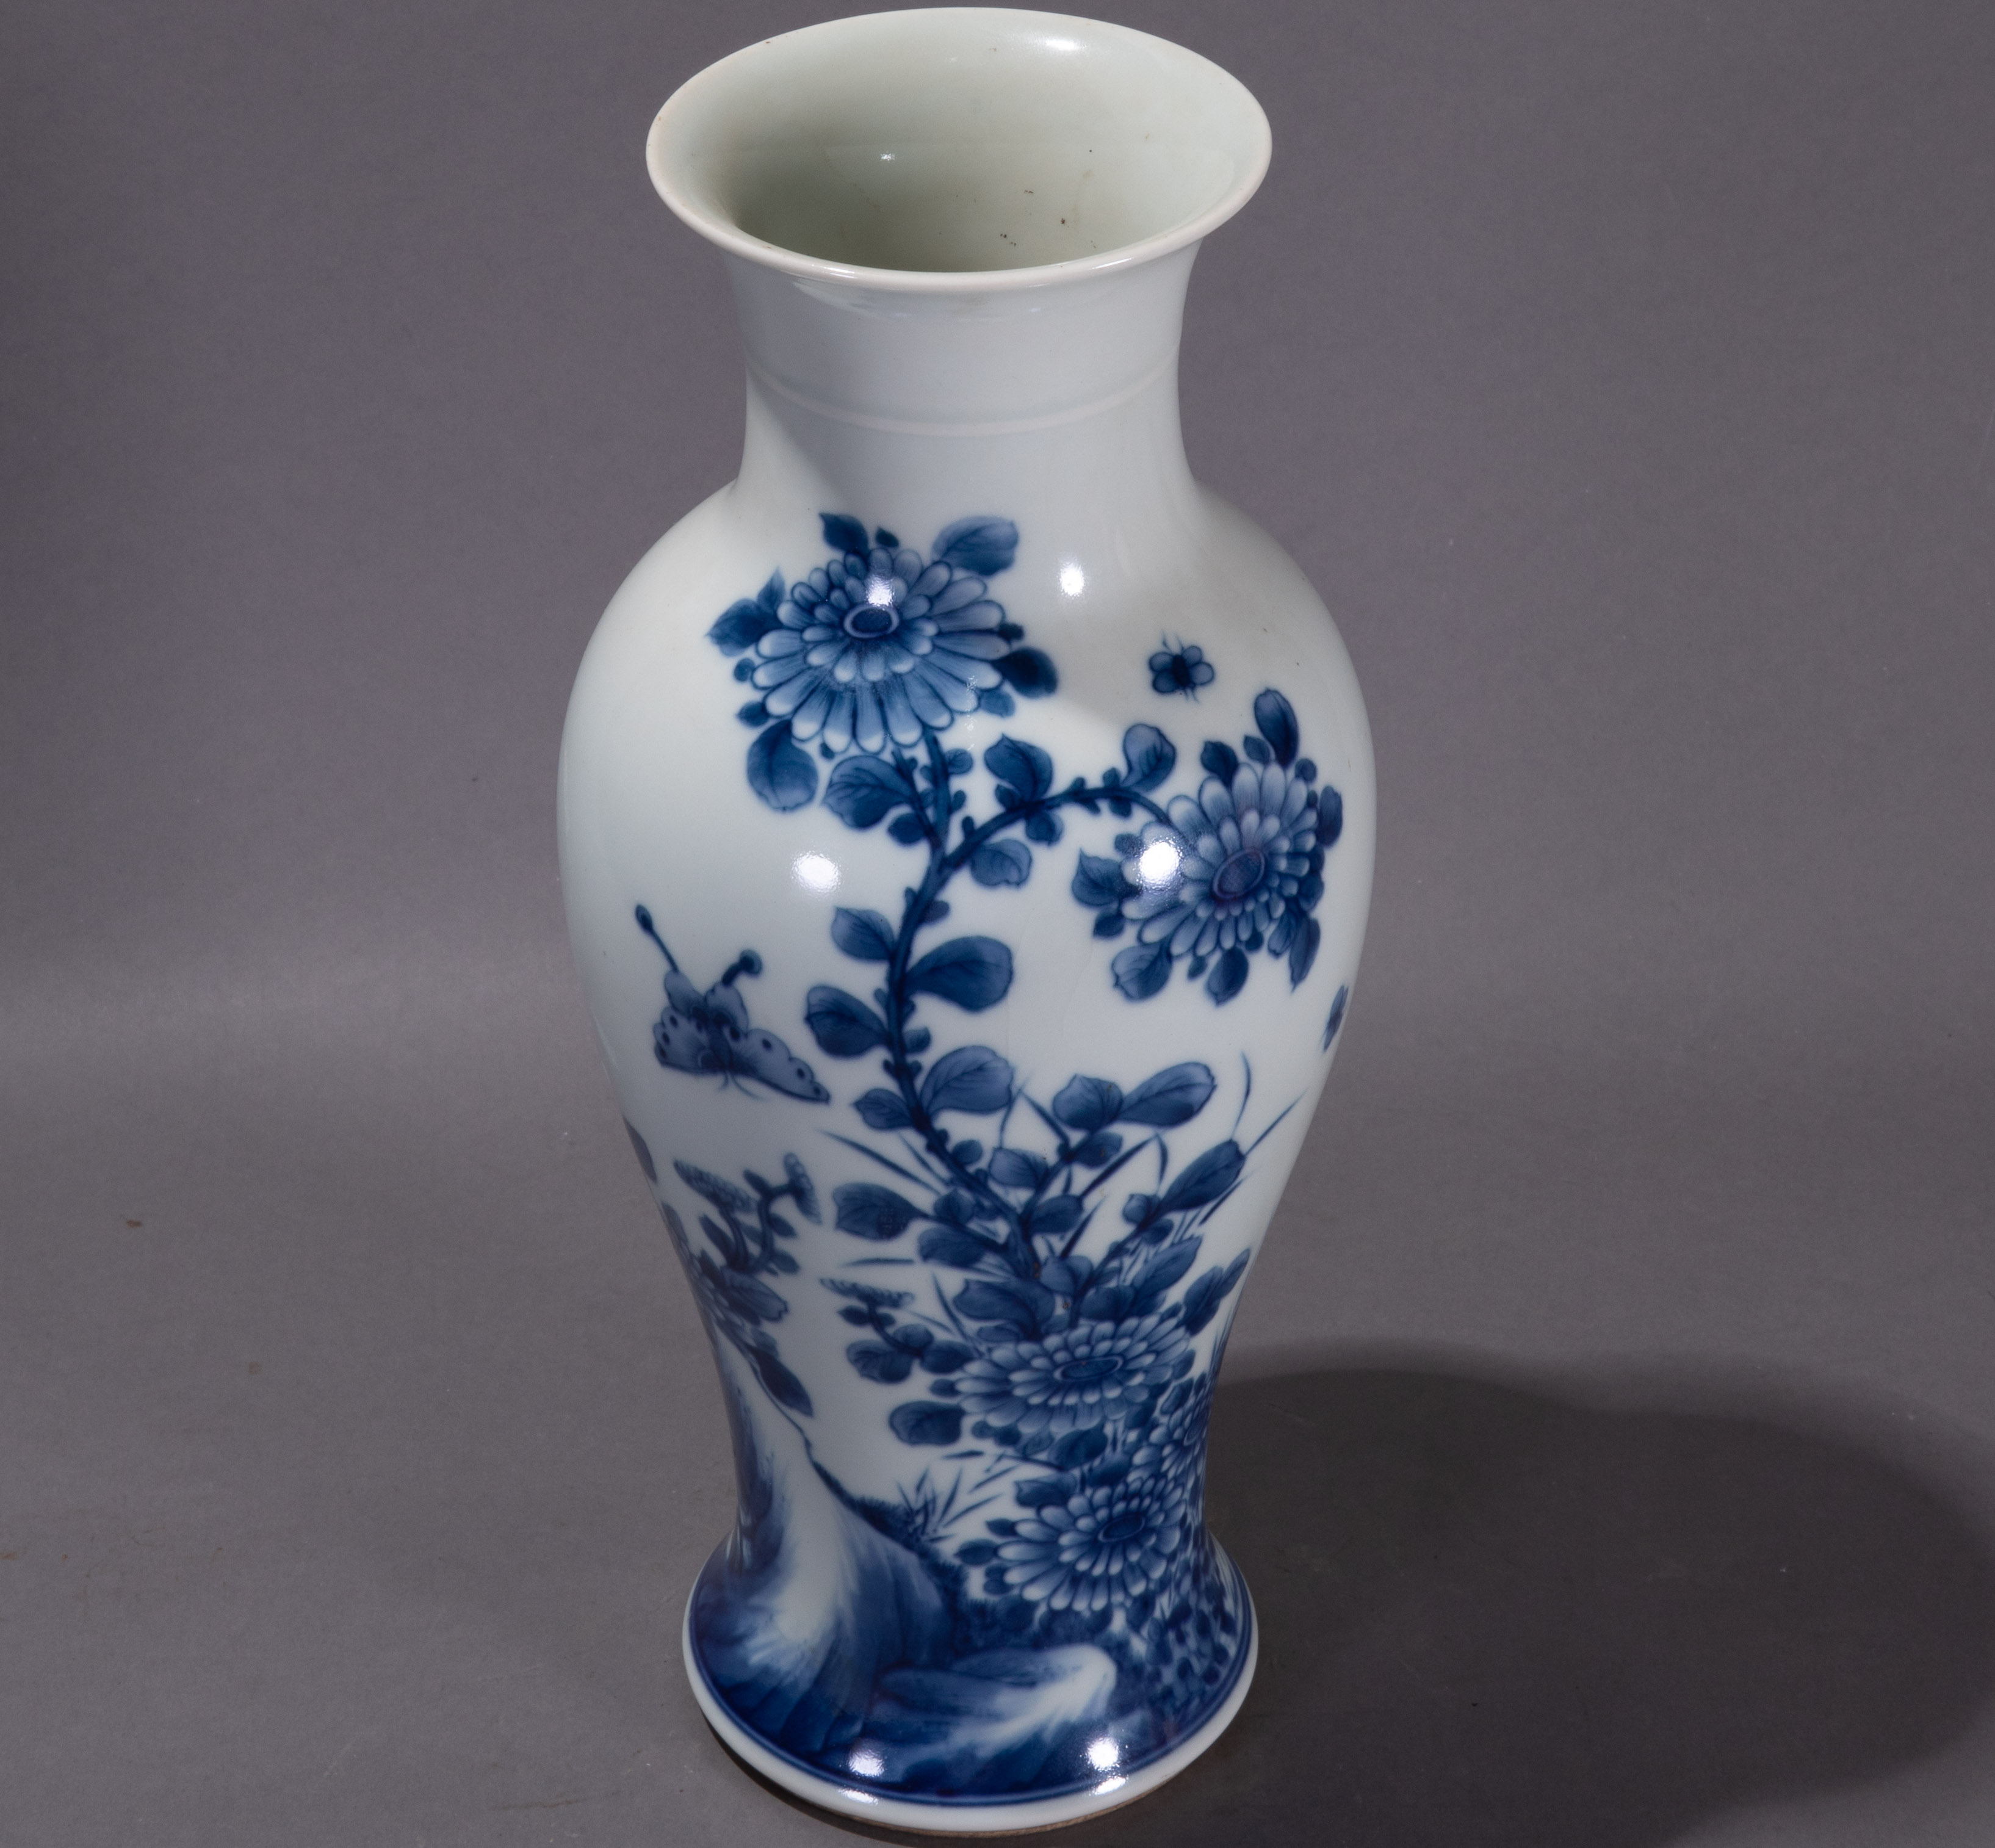 ancient chinese blue and white porcelain vase中国古代青花瓷花瓶